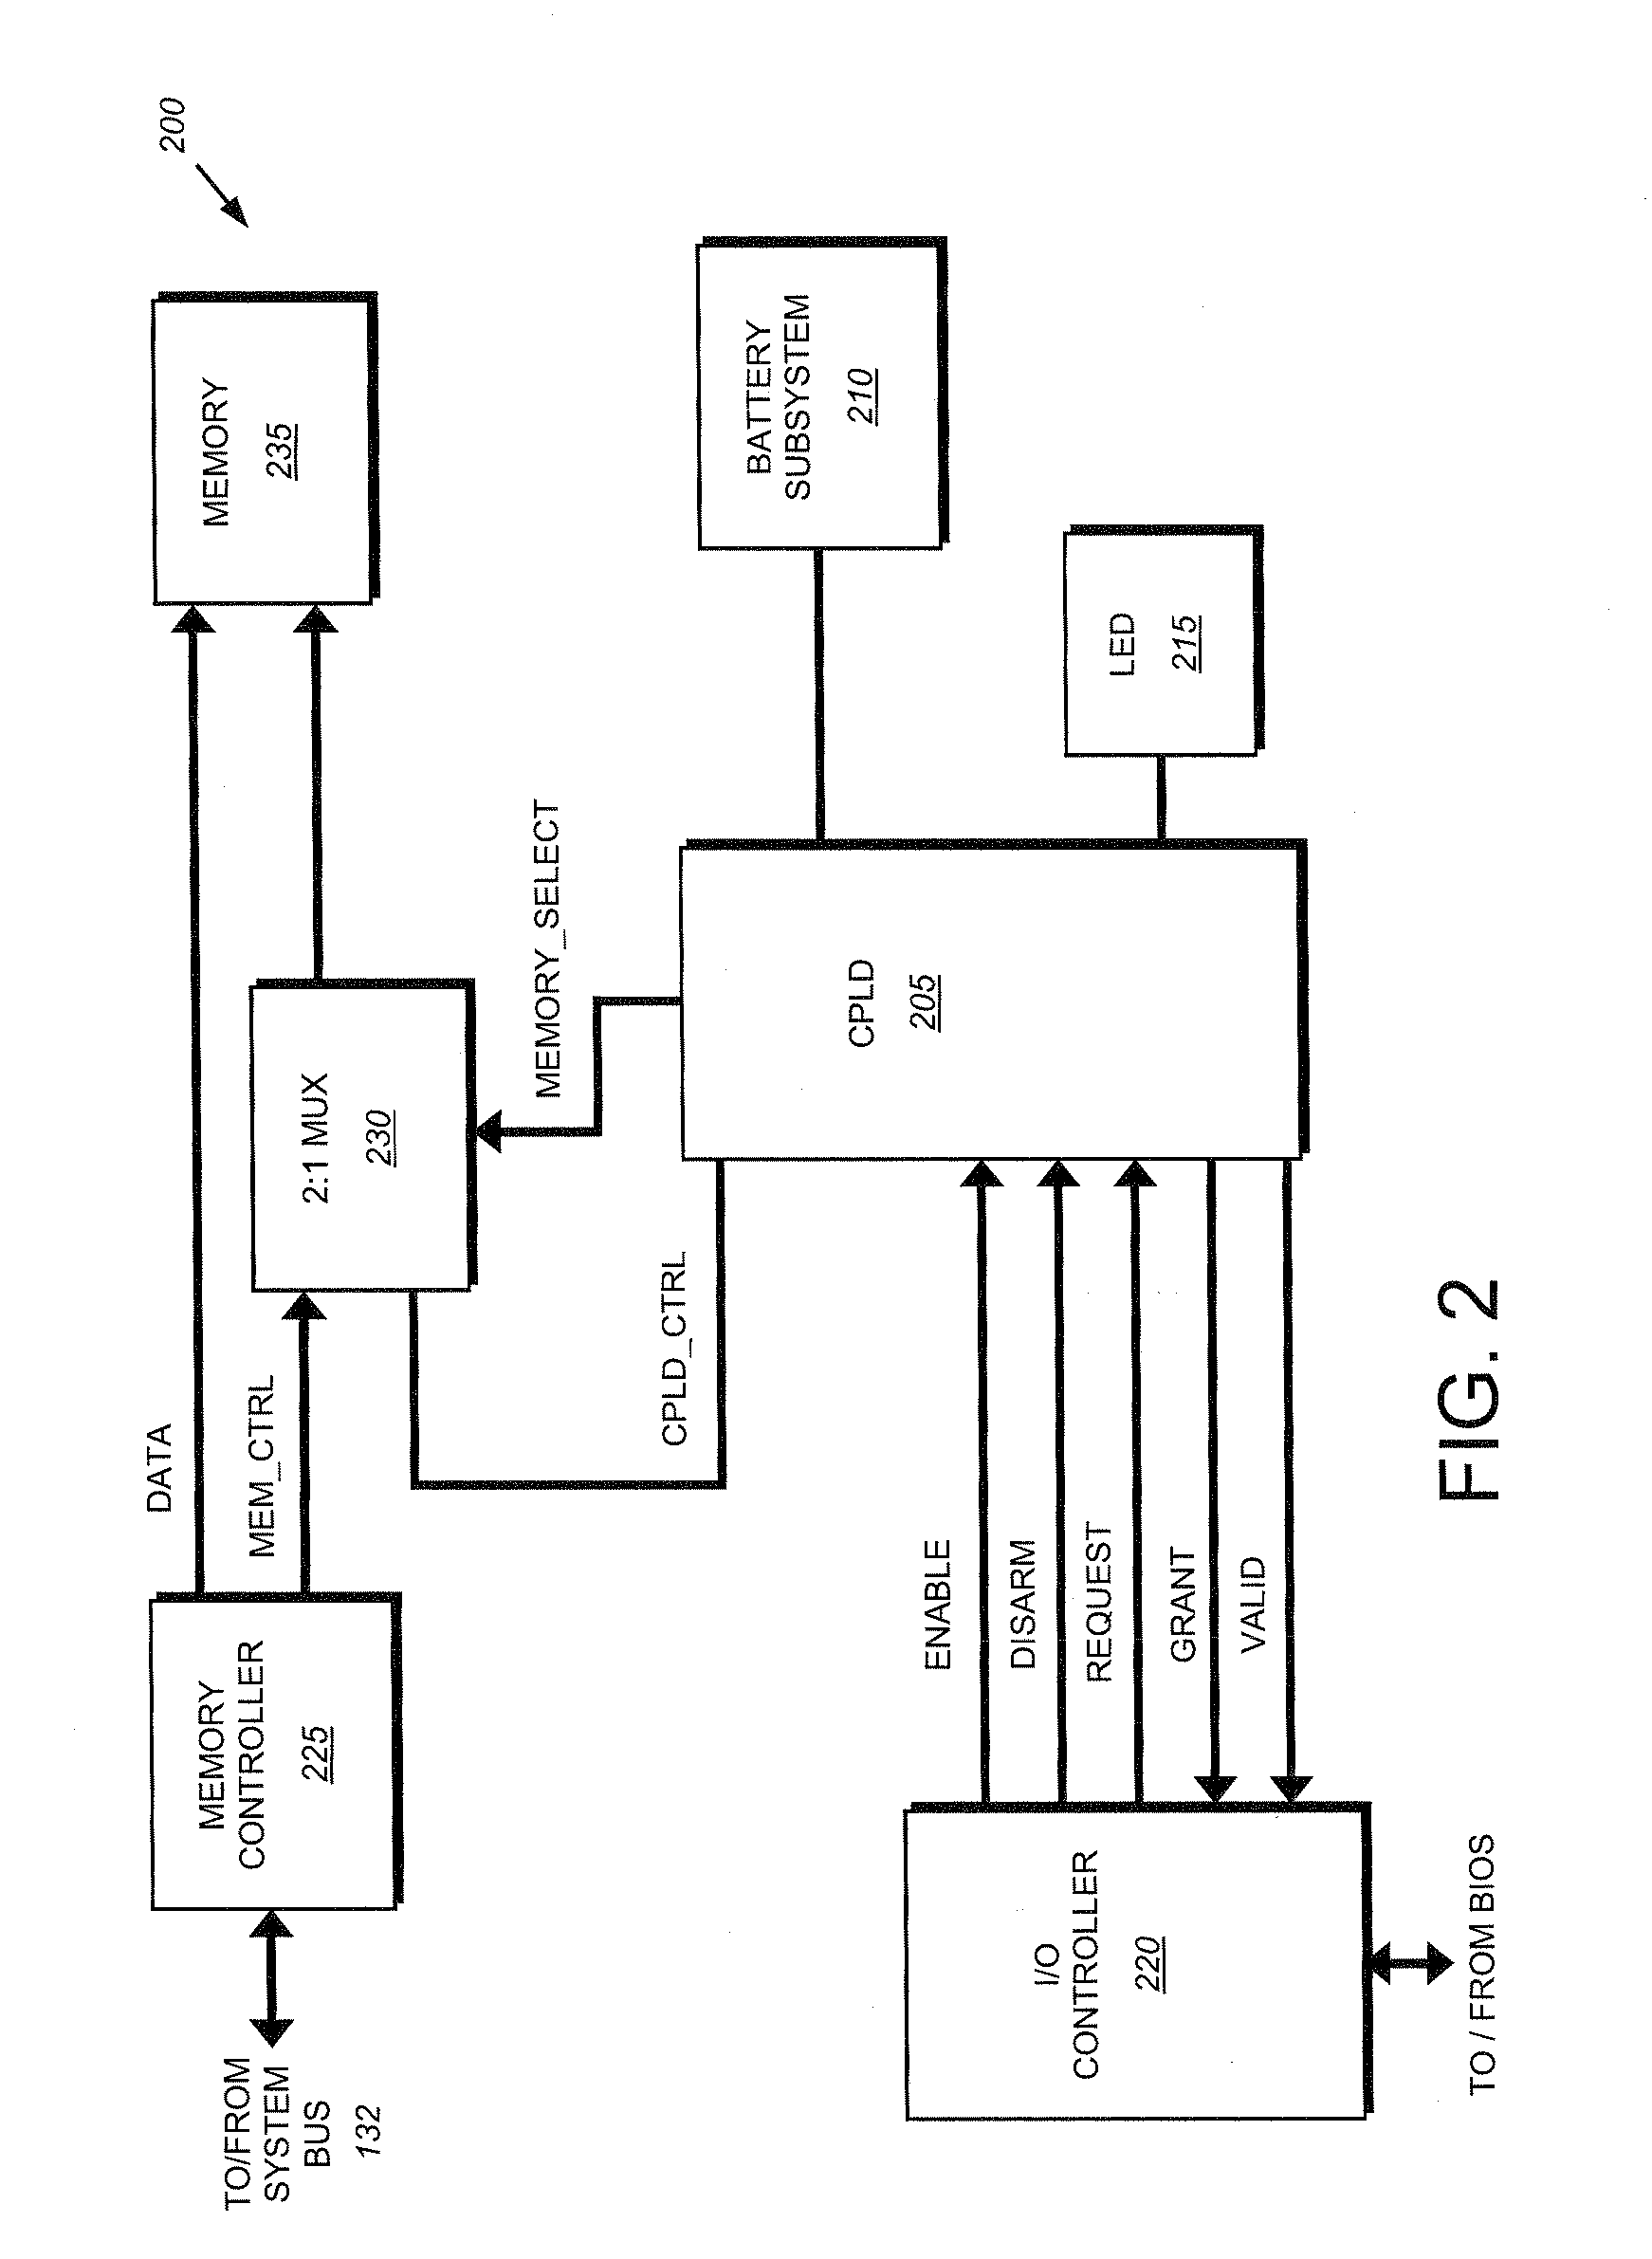 System and method for protecting memory during system initialization